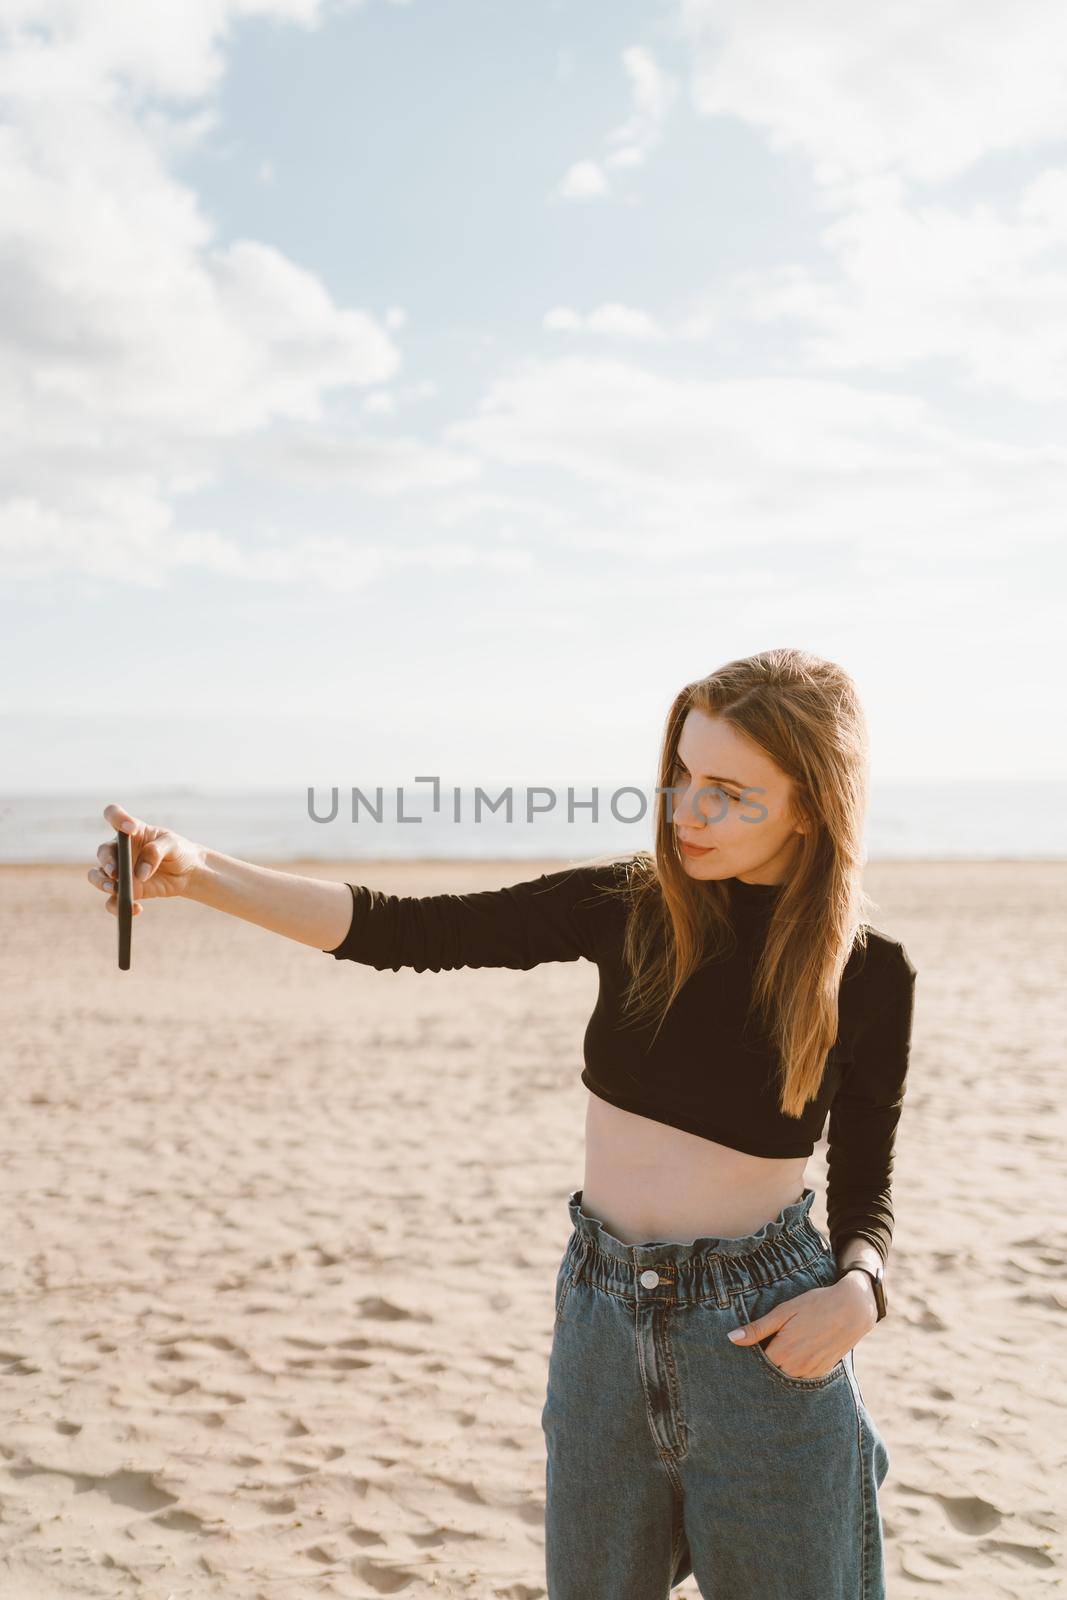 Pretty female with long hair, blonde takes photo on mobile phone on sandy beach in summer or autumn. Beautiful woman in jeans and black top